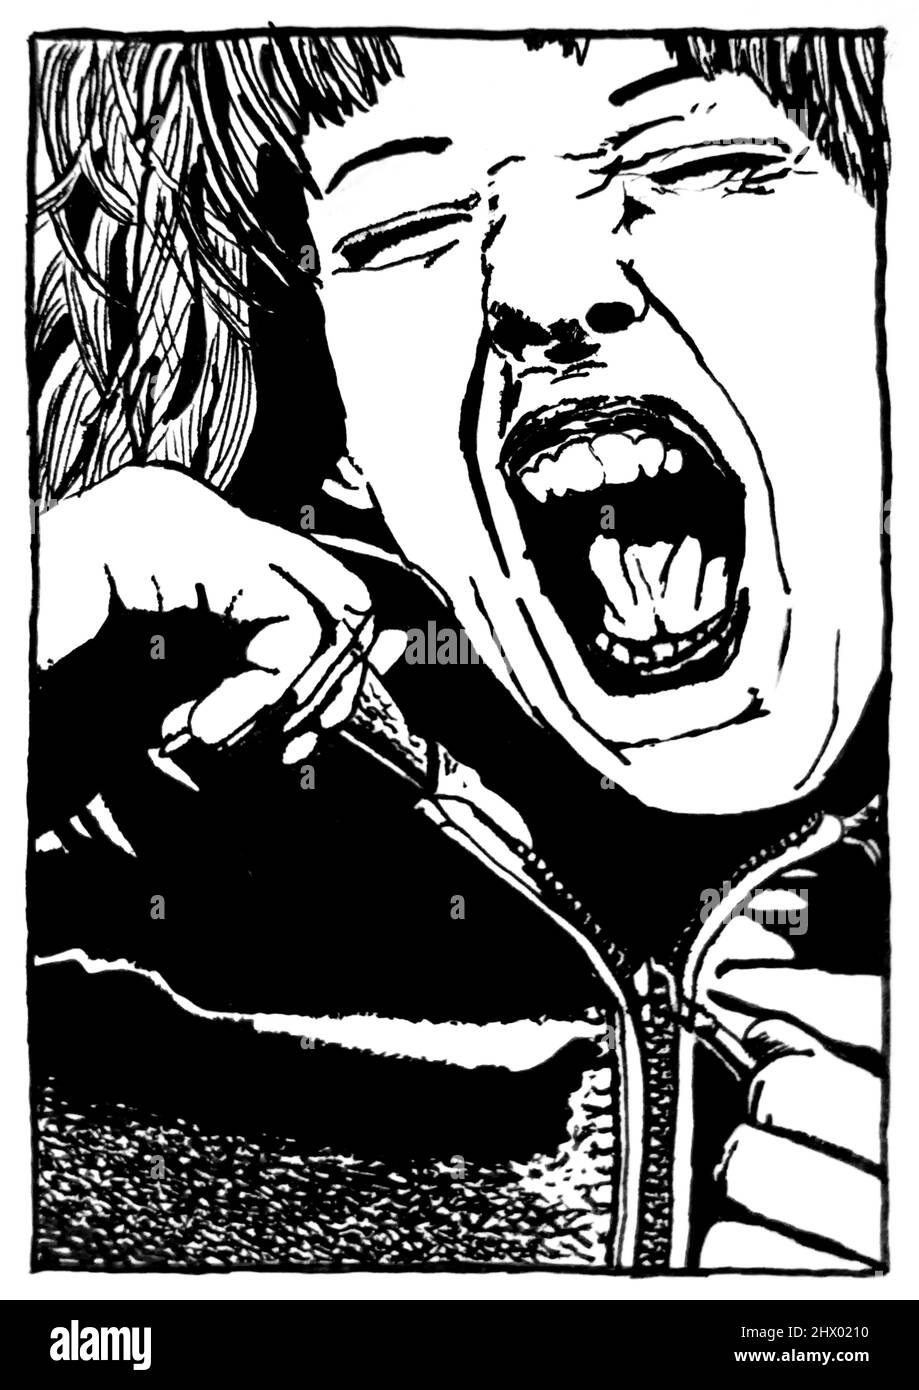 A drawing with black pen shows a middle aged woman. She symbolically frees herself from shackles, visible as freeing herself from a leather jacket. Stock Photo